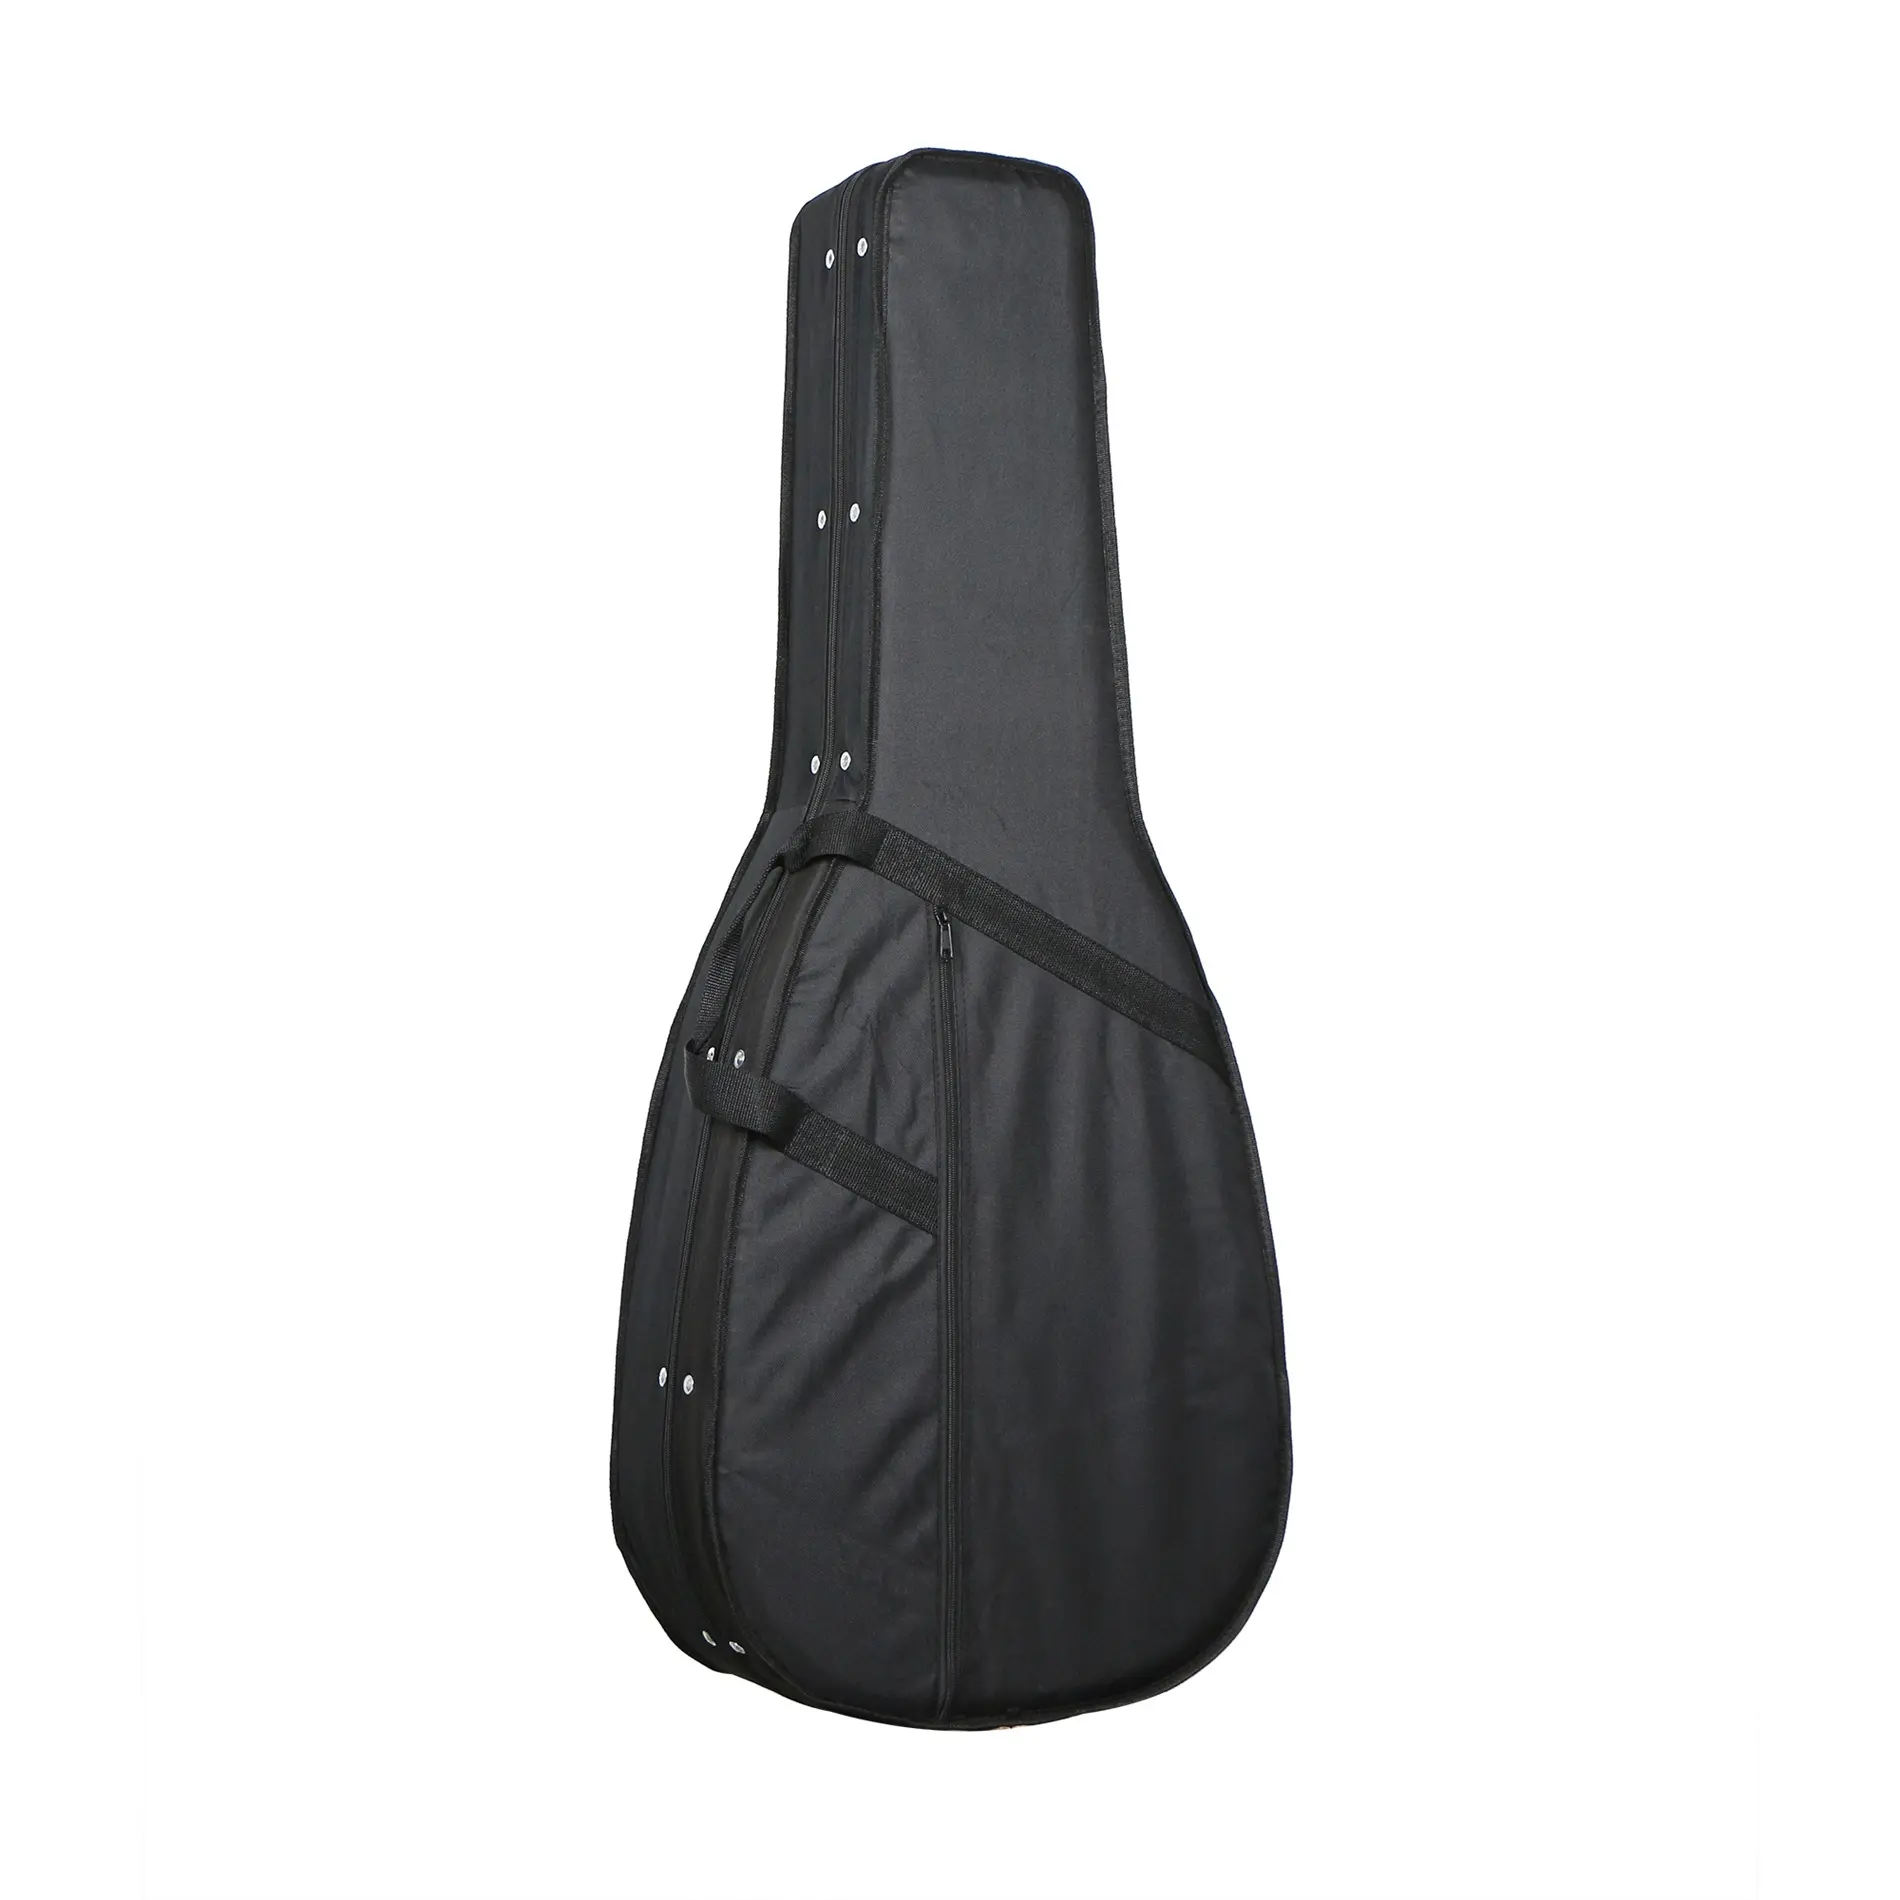 OEM <span class=keywords><strong>Tùy</strong></span> <span class=keywords><strong>Chỉnh</strong></span> Đen Polyfoam <span class=keywords><strong>Guitar</strong></span> <span class=keywords><strong>Trường</strong></span> <span class=keywords><strong>Hợp</strong></span>/Acoustic <span class=keywords><strong>Guitar</strong></span> Foam <span class=keywords><strong>Trường</strong></span> <span class=keywords><strong>Hợp</strong></span>